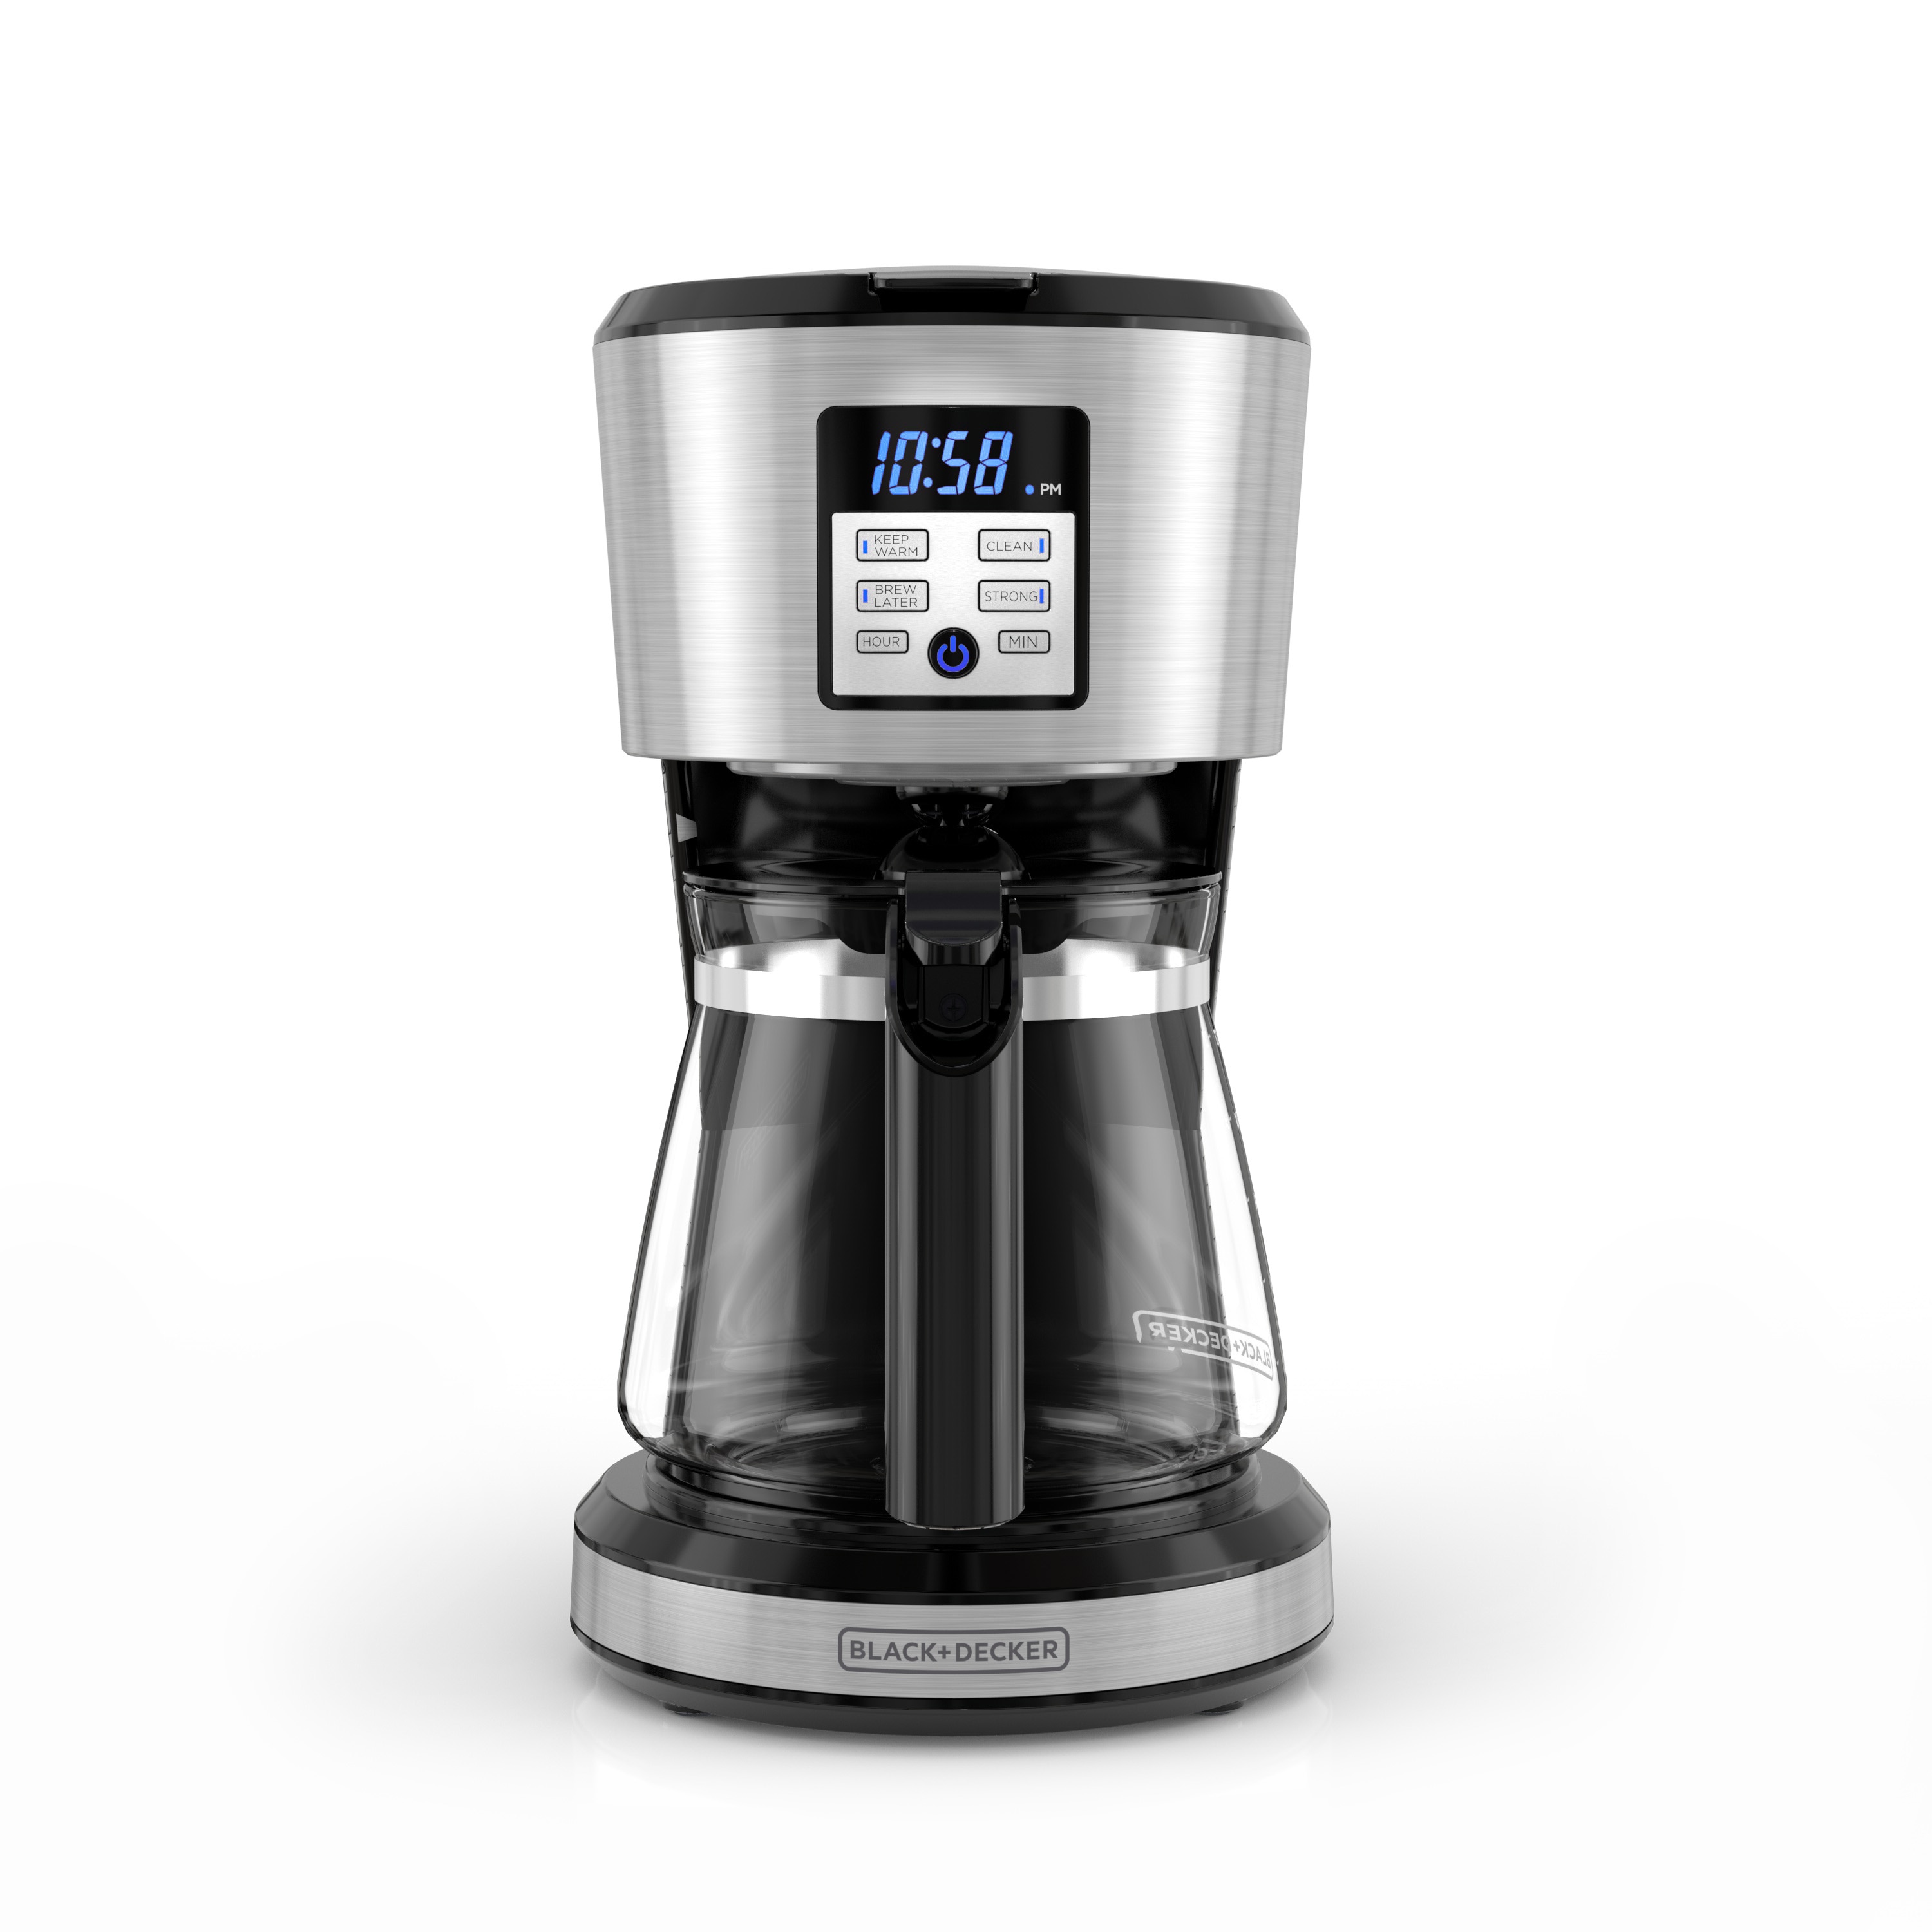  BLACK+DECKER 12 Cup Thermal Programmable Coffee Maker with Brew  Strength and VORTEX Technology, Black/Steel, CM2046S: Home & Kitchen